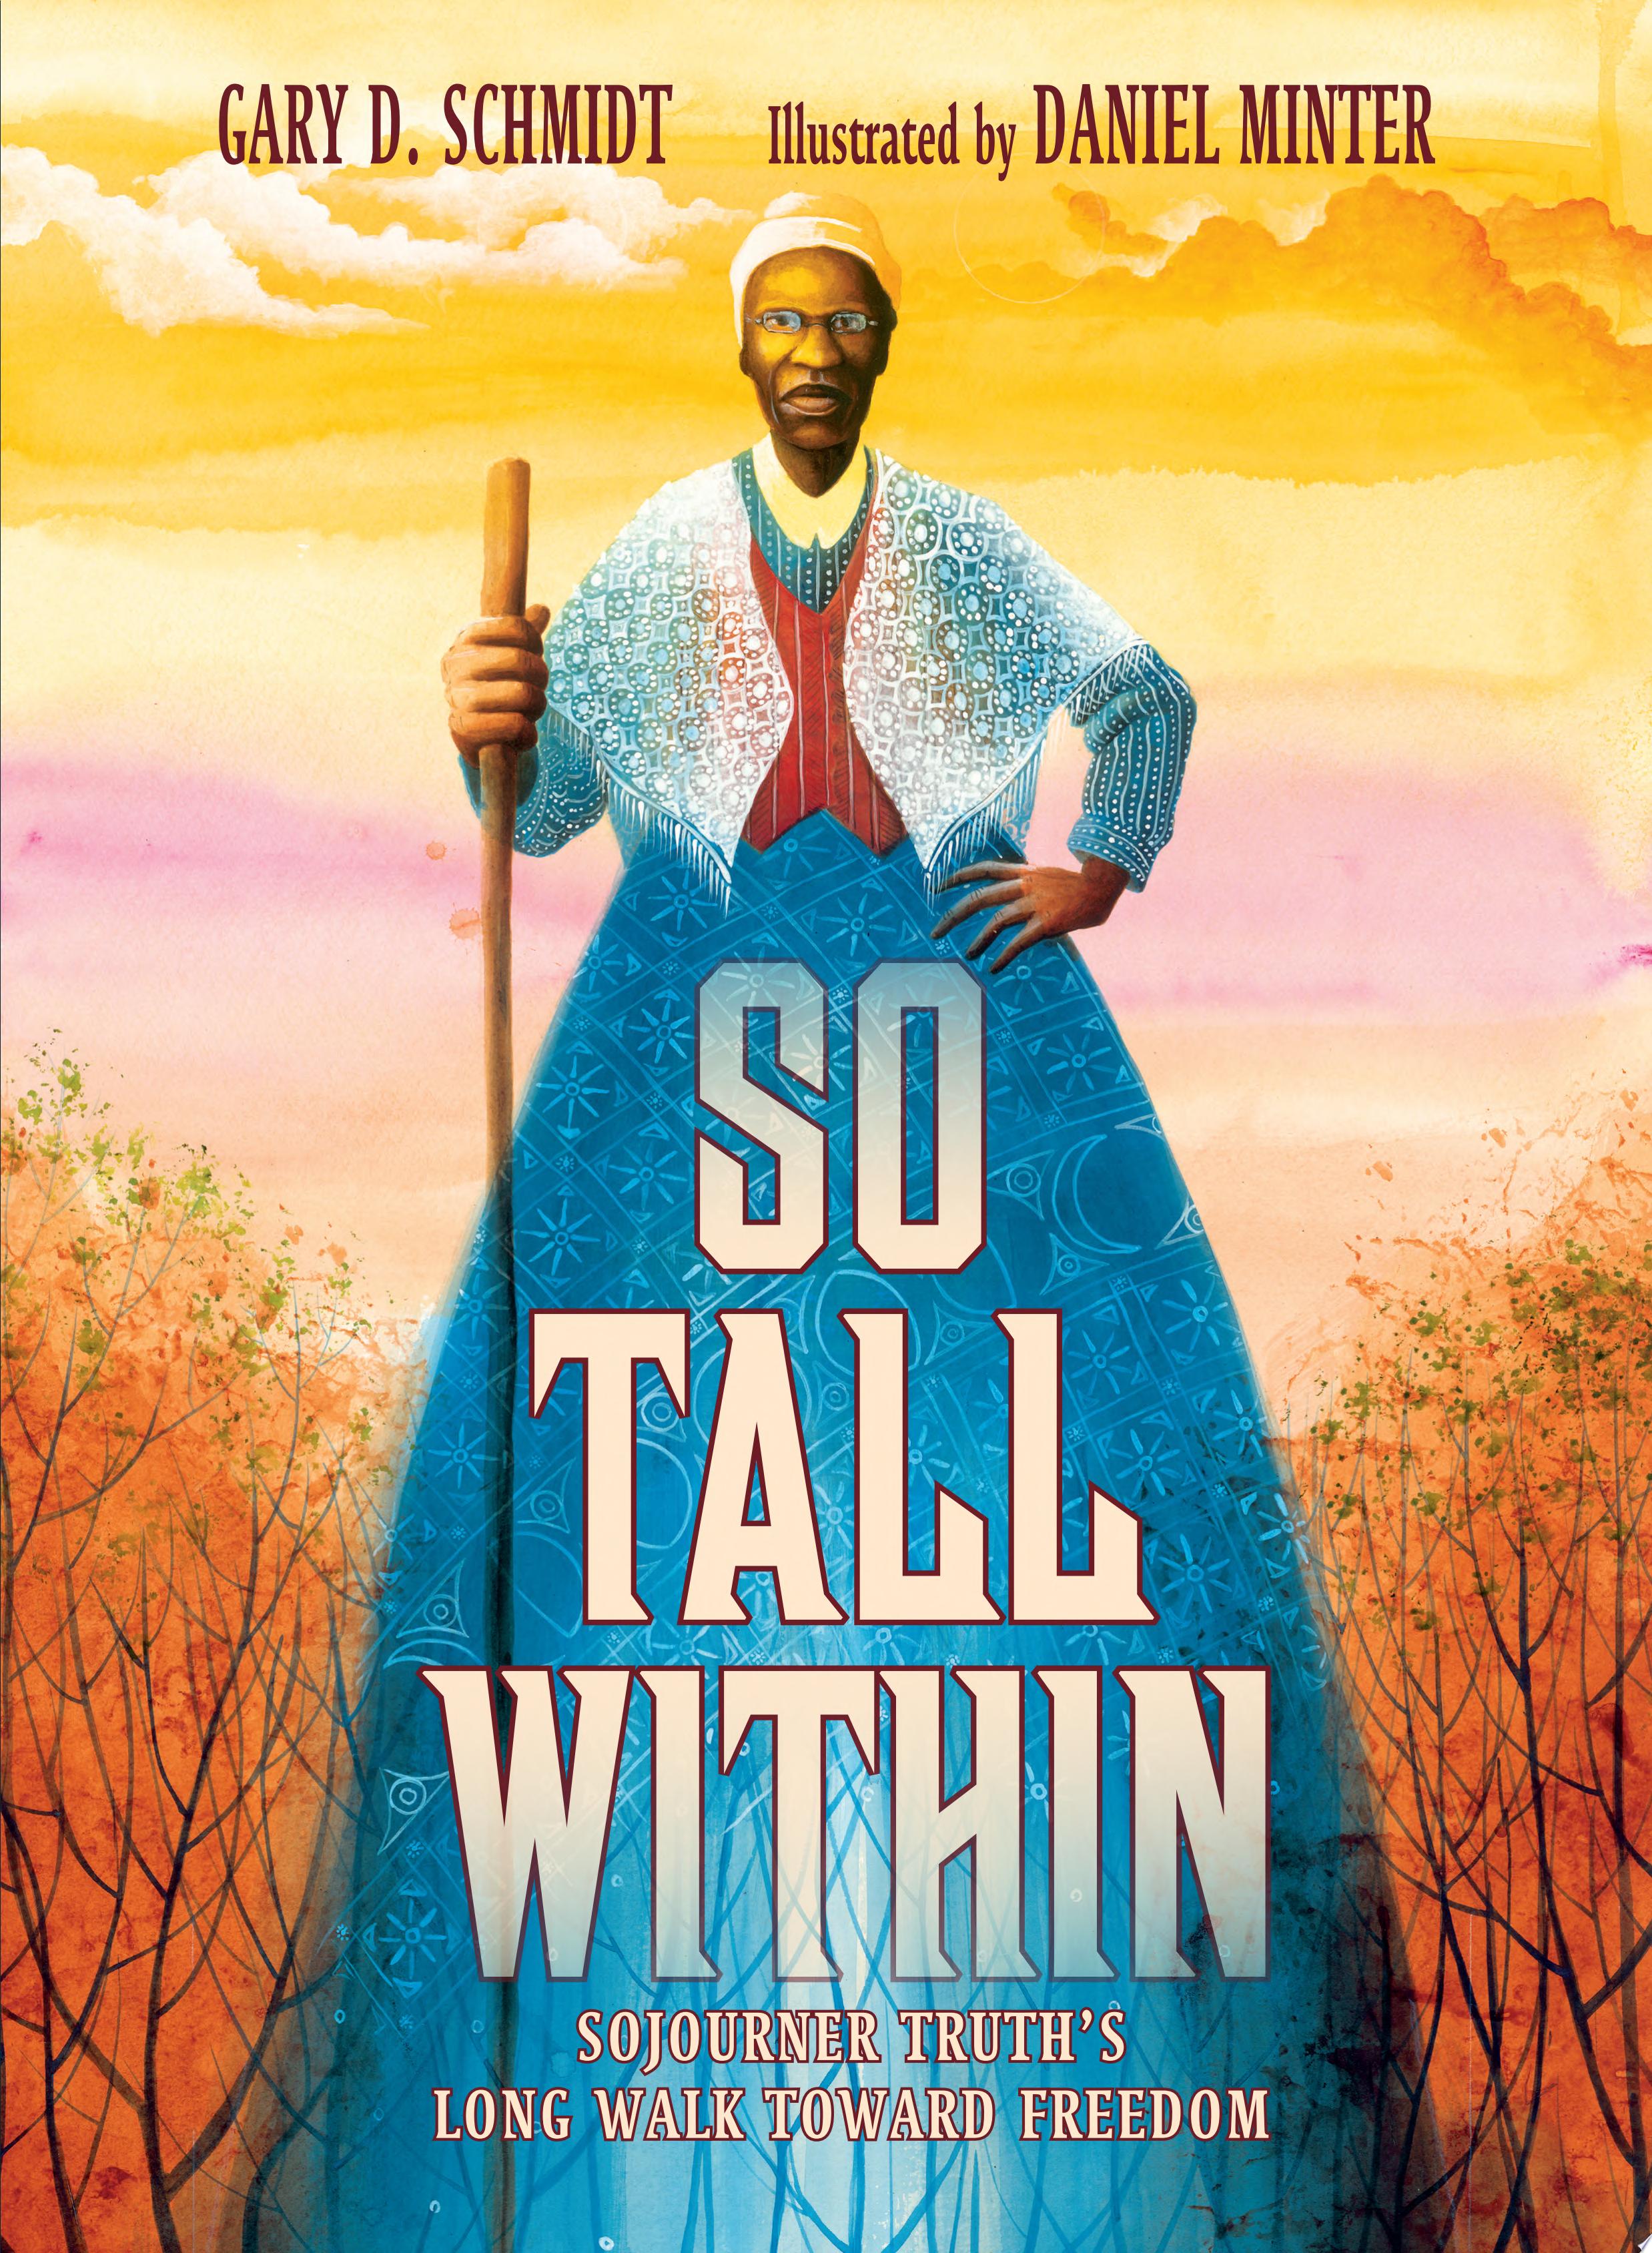 Image for "So Tall Within" - a towering silhouette of Harriet Tubman in front of a watercolor background.